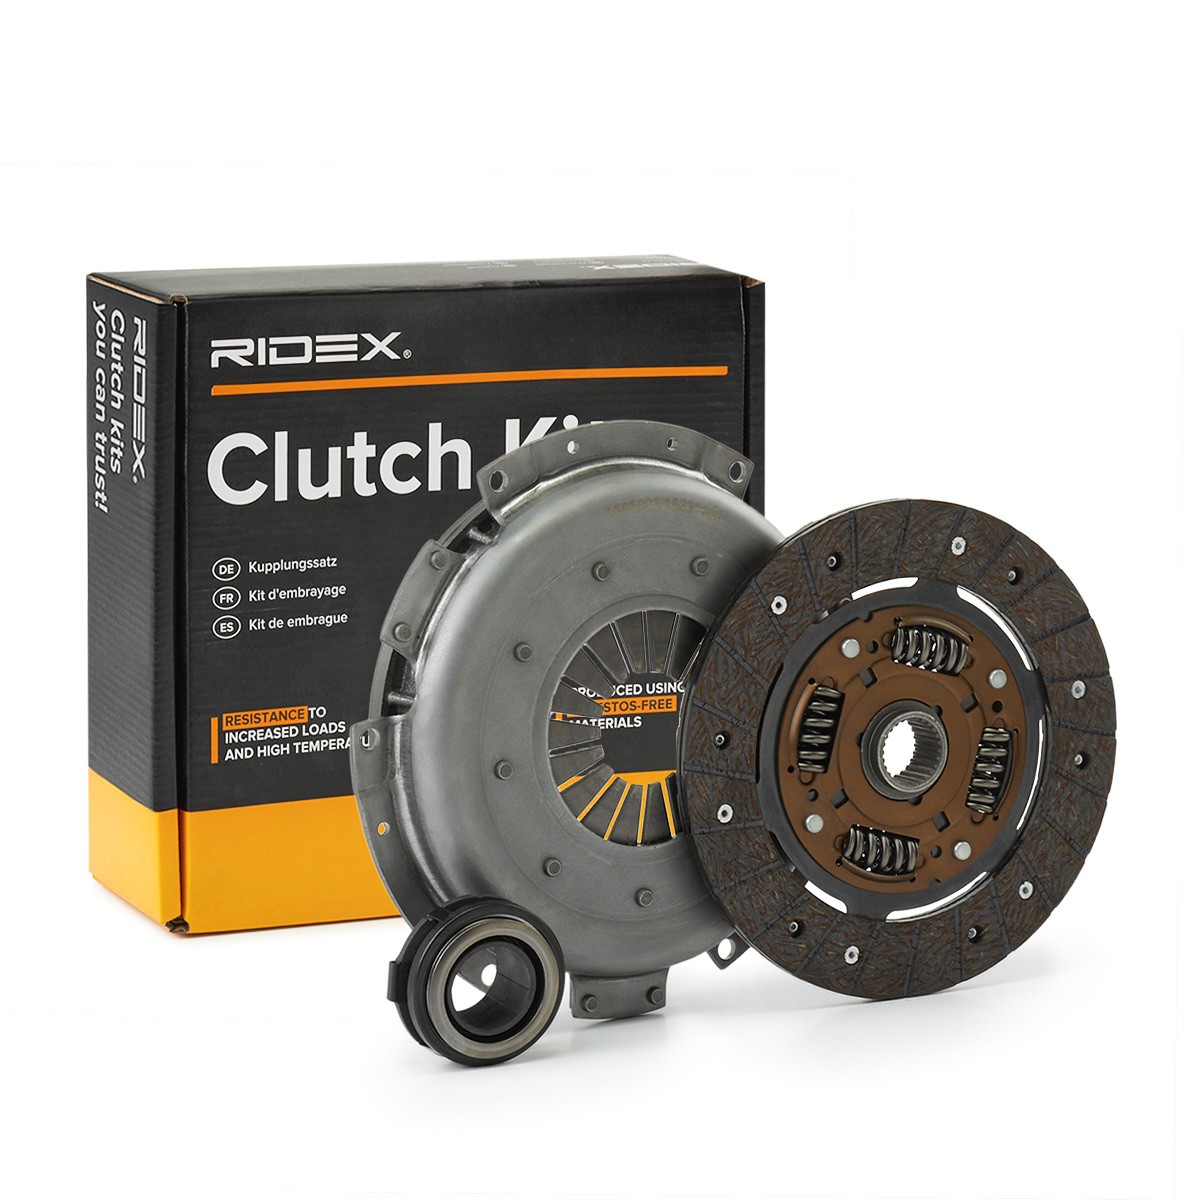 RIDEX Complete clutch kit 479C0552 suitable for MERCEDES-BENZ 123-Series, 124-Series, 190